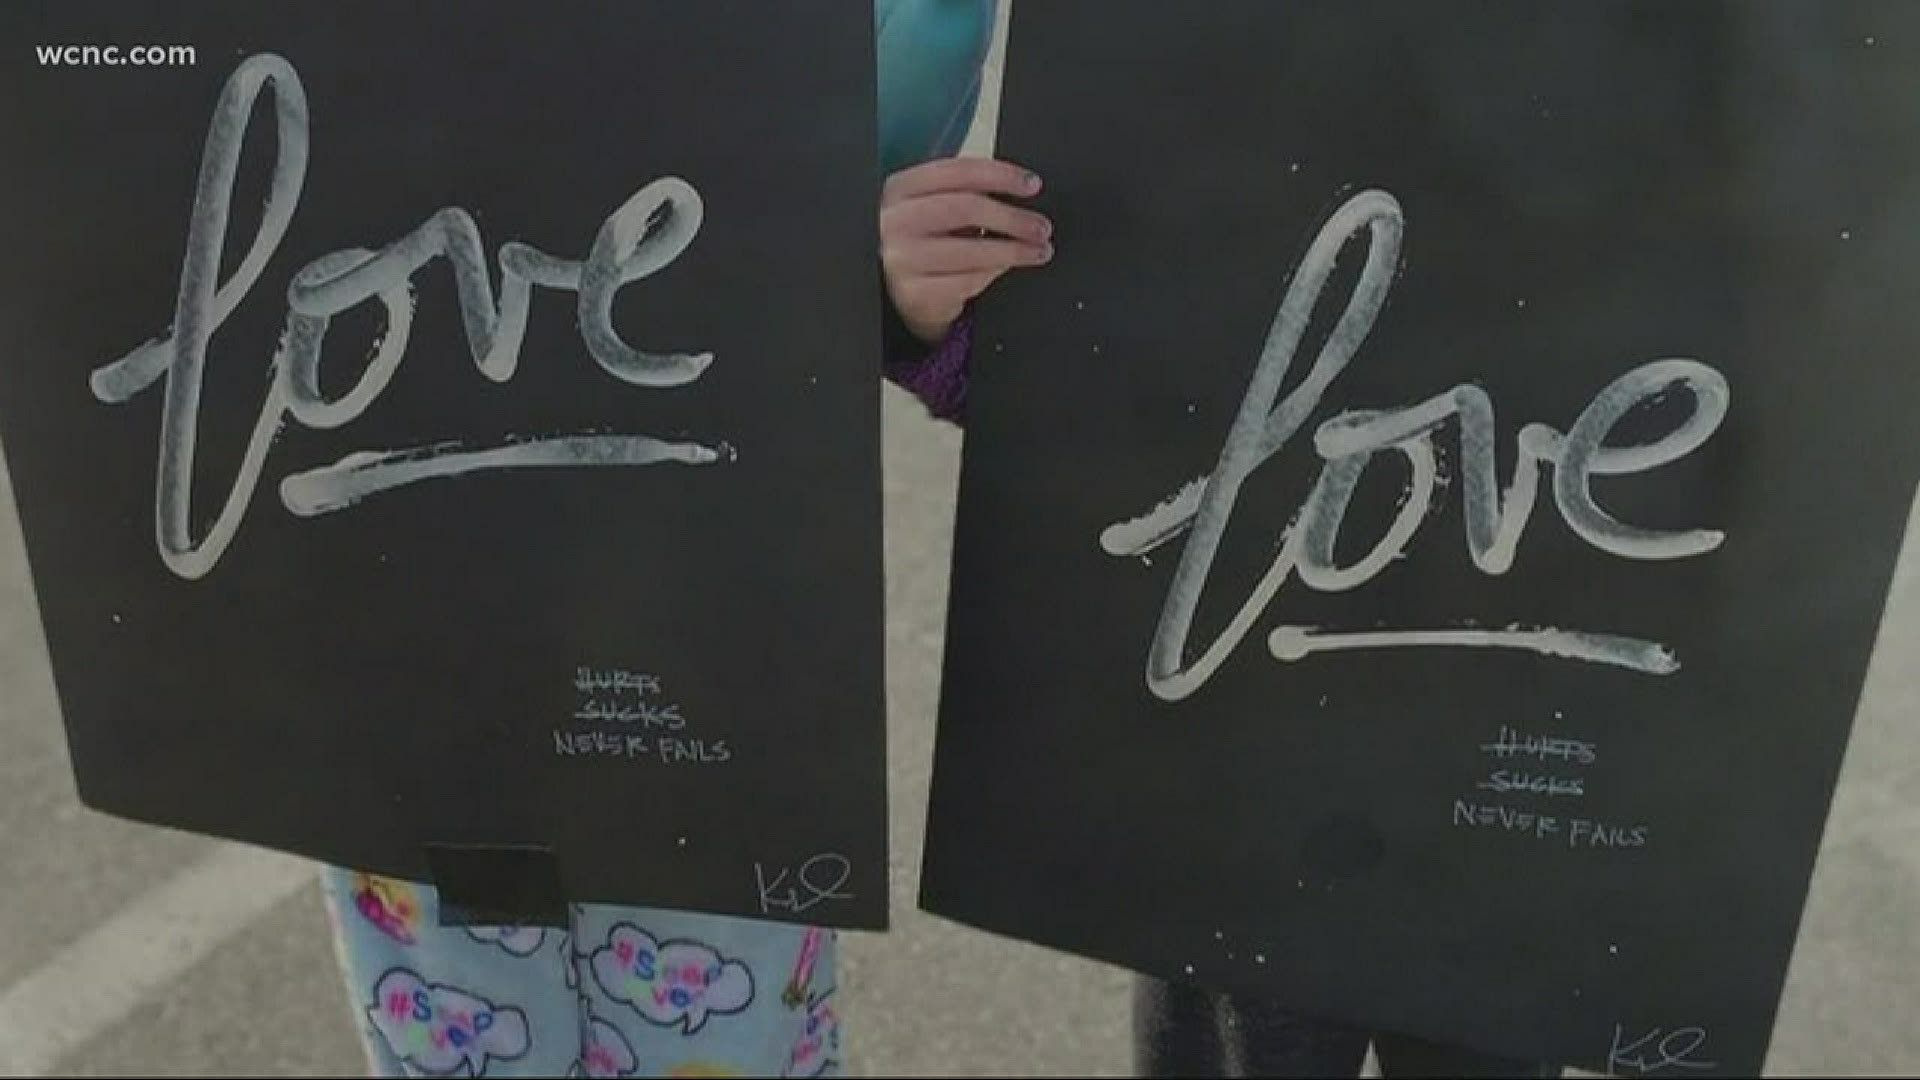 Artist used his energy to literally spread the love posting painted canvas around the city.